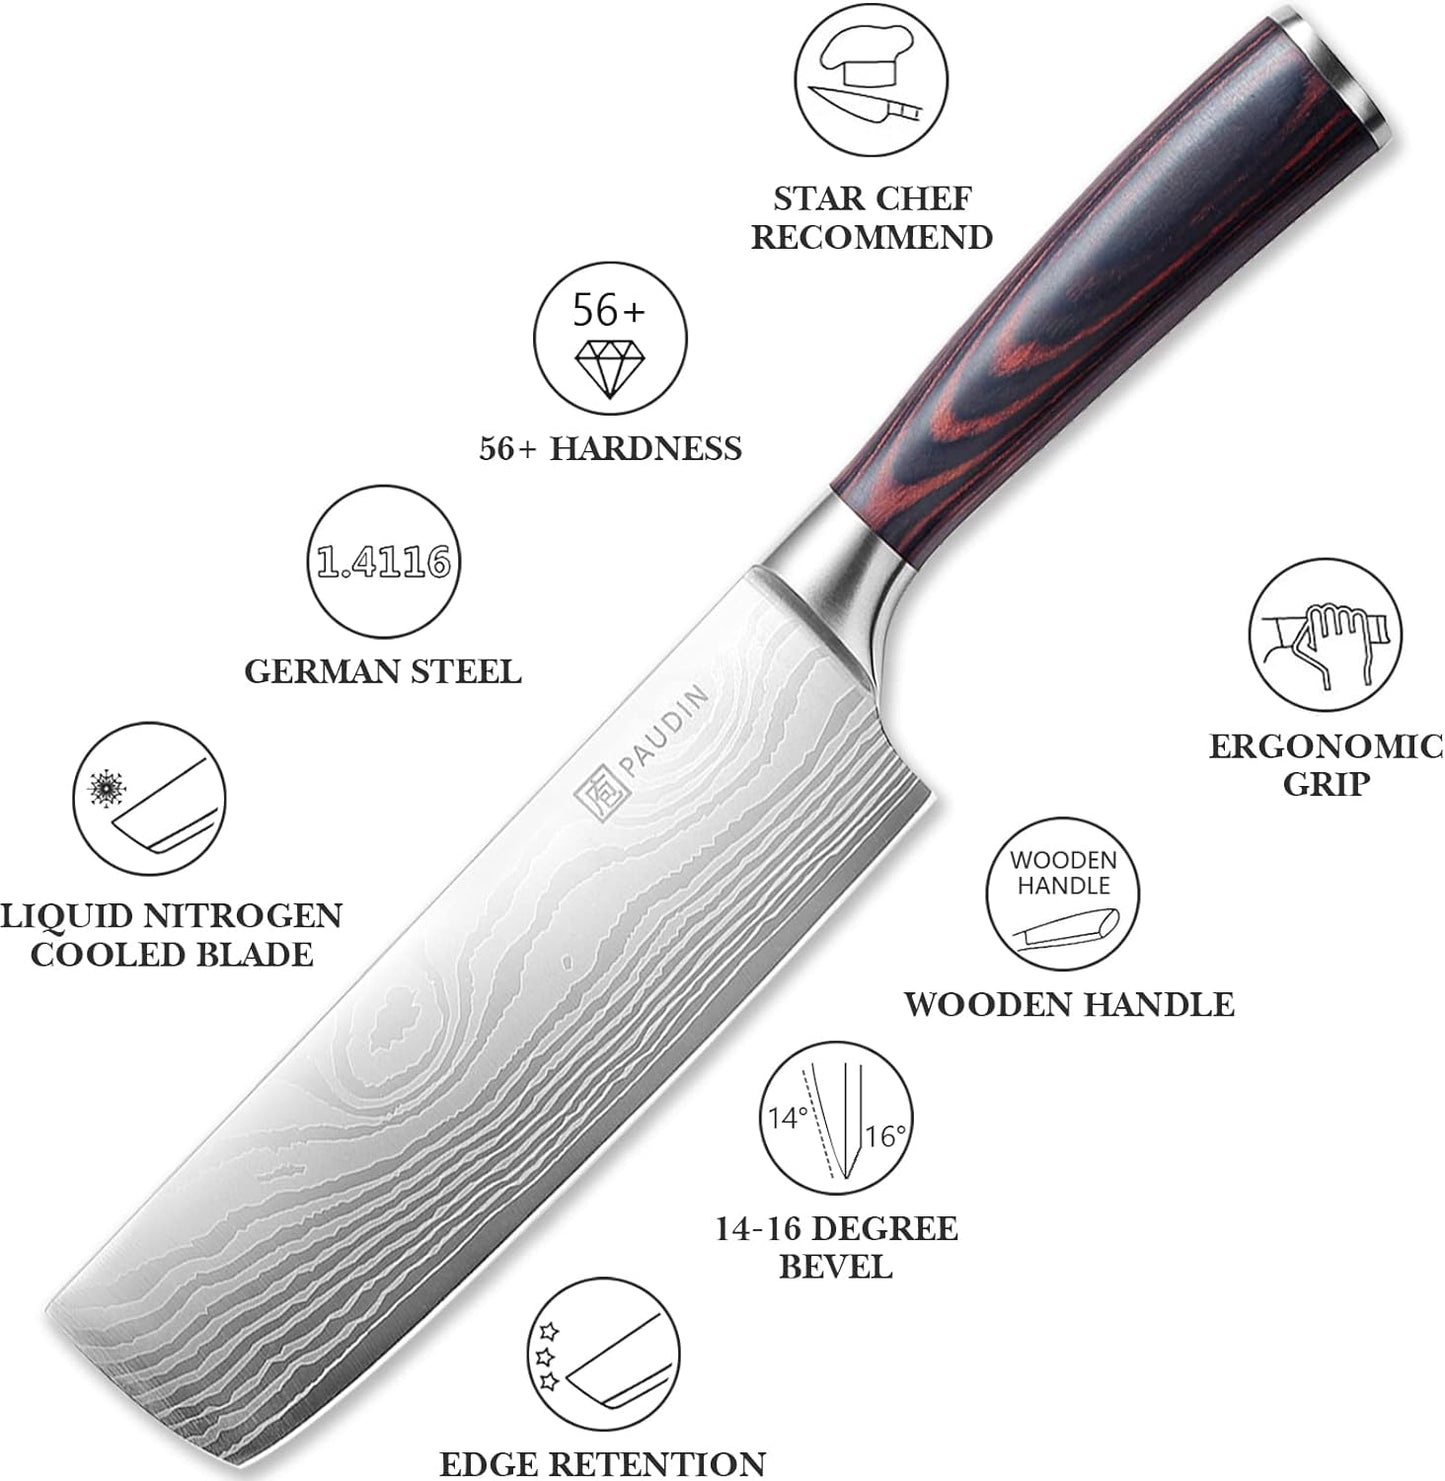 Nakiri Knife - 7" Razor Sharp Meat Cleaver and Vegetable Kitchen Knife, High Carbon Stainless Steel, Multipurpose Asian Chef Knife for Home and Kitchen with Ergonomic Handle